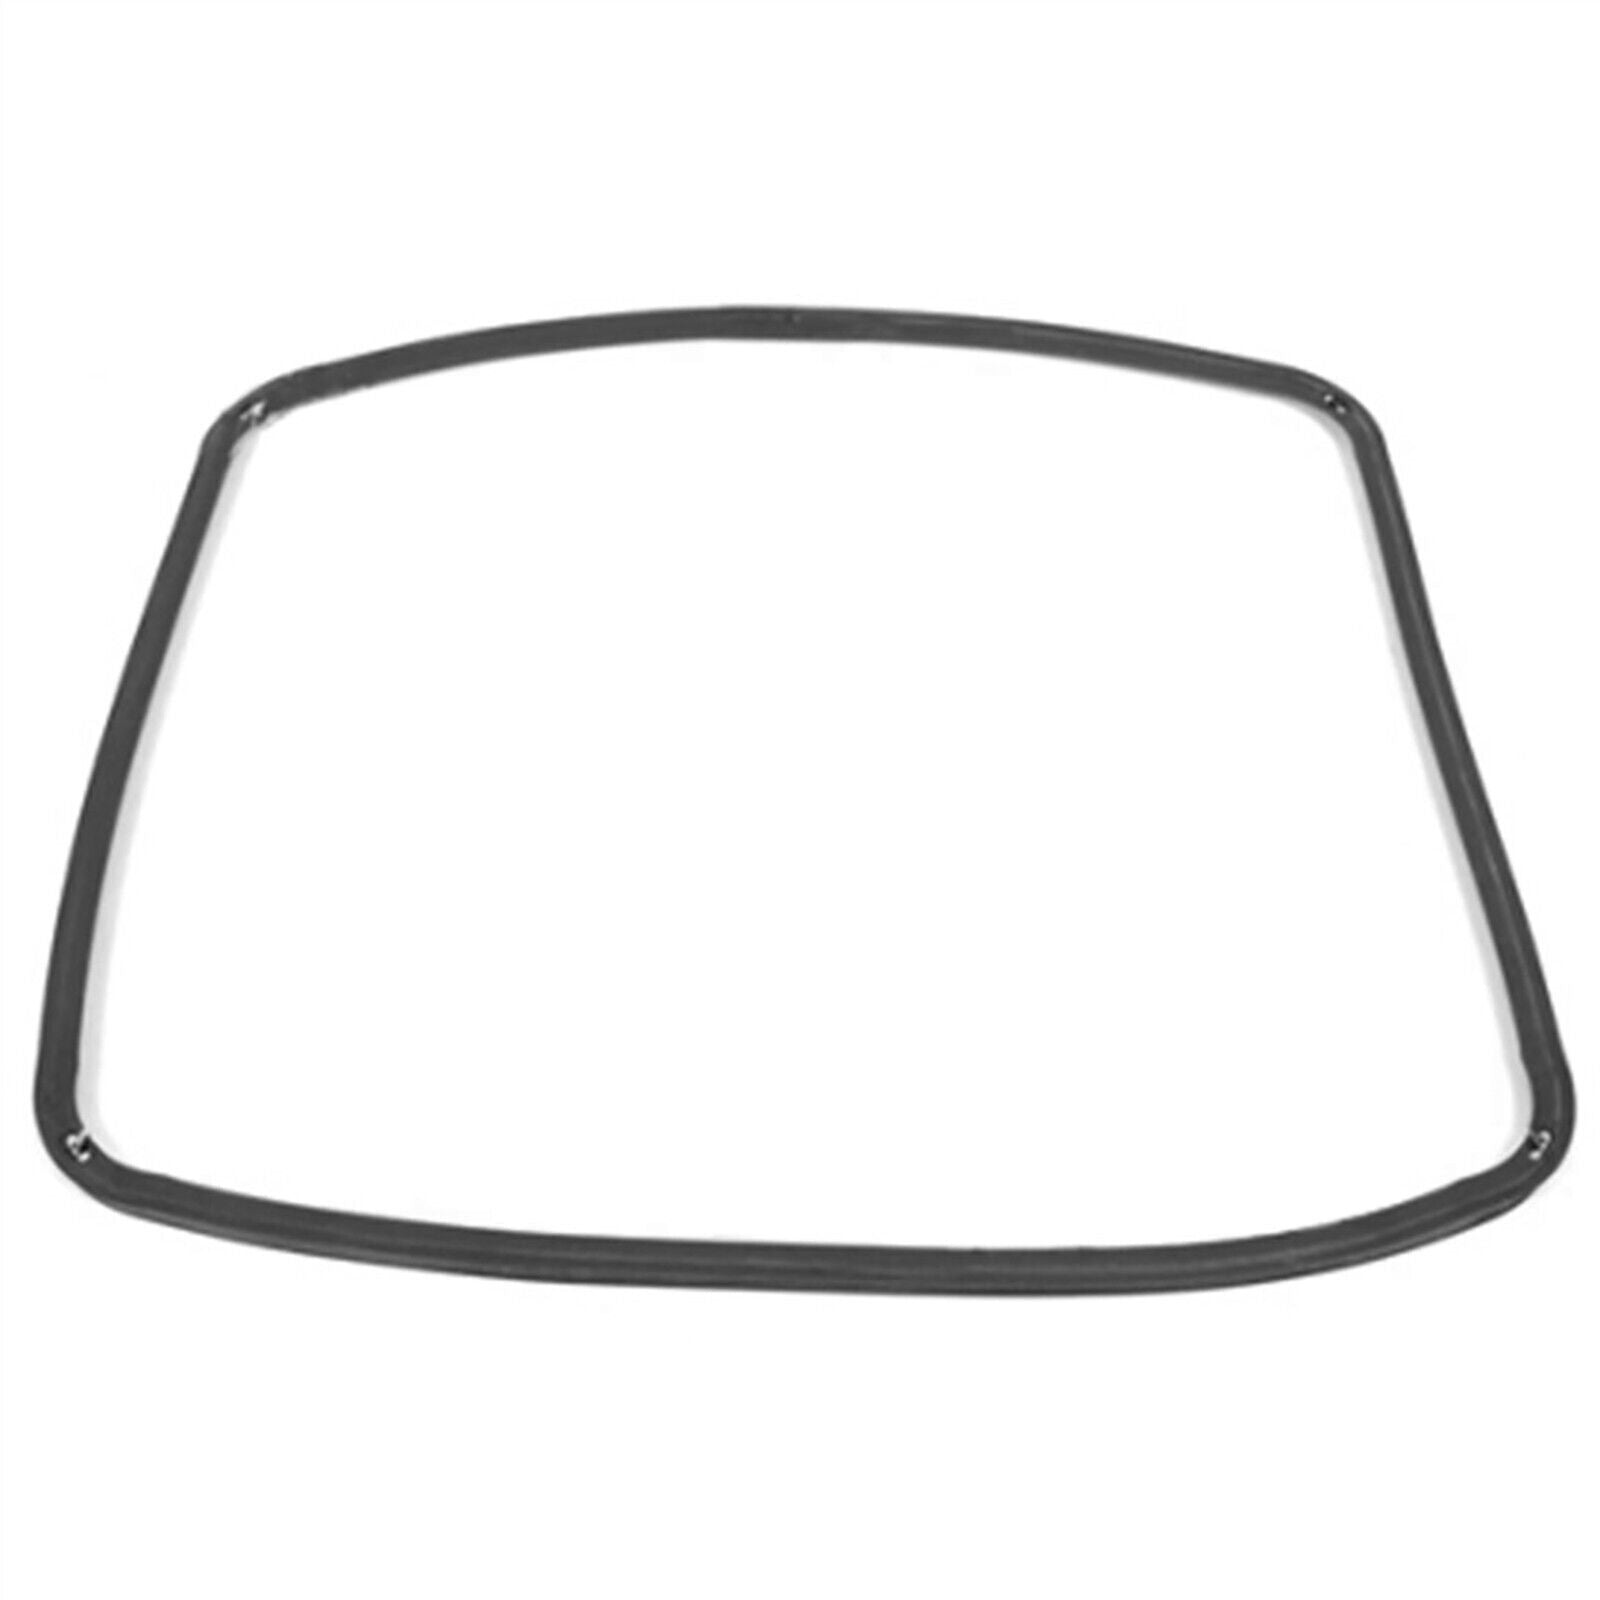 Door Seal for Cooke & Lewis CLFSB60 CSB60 CSB60A OVFO60 Main Oven Gasket